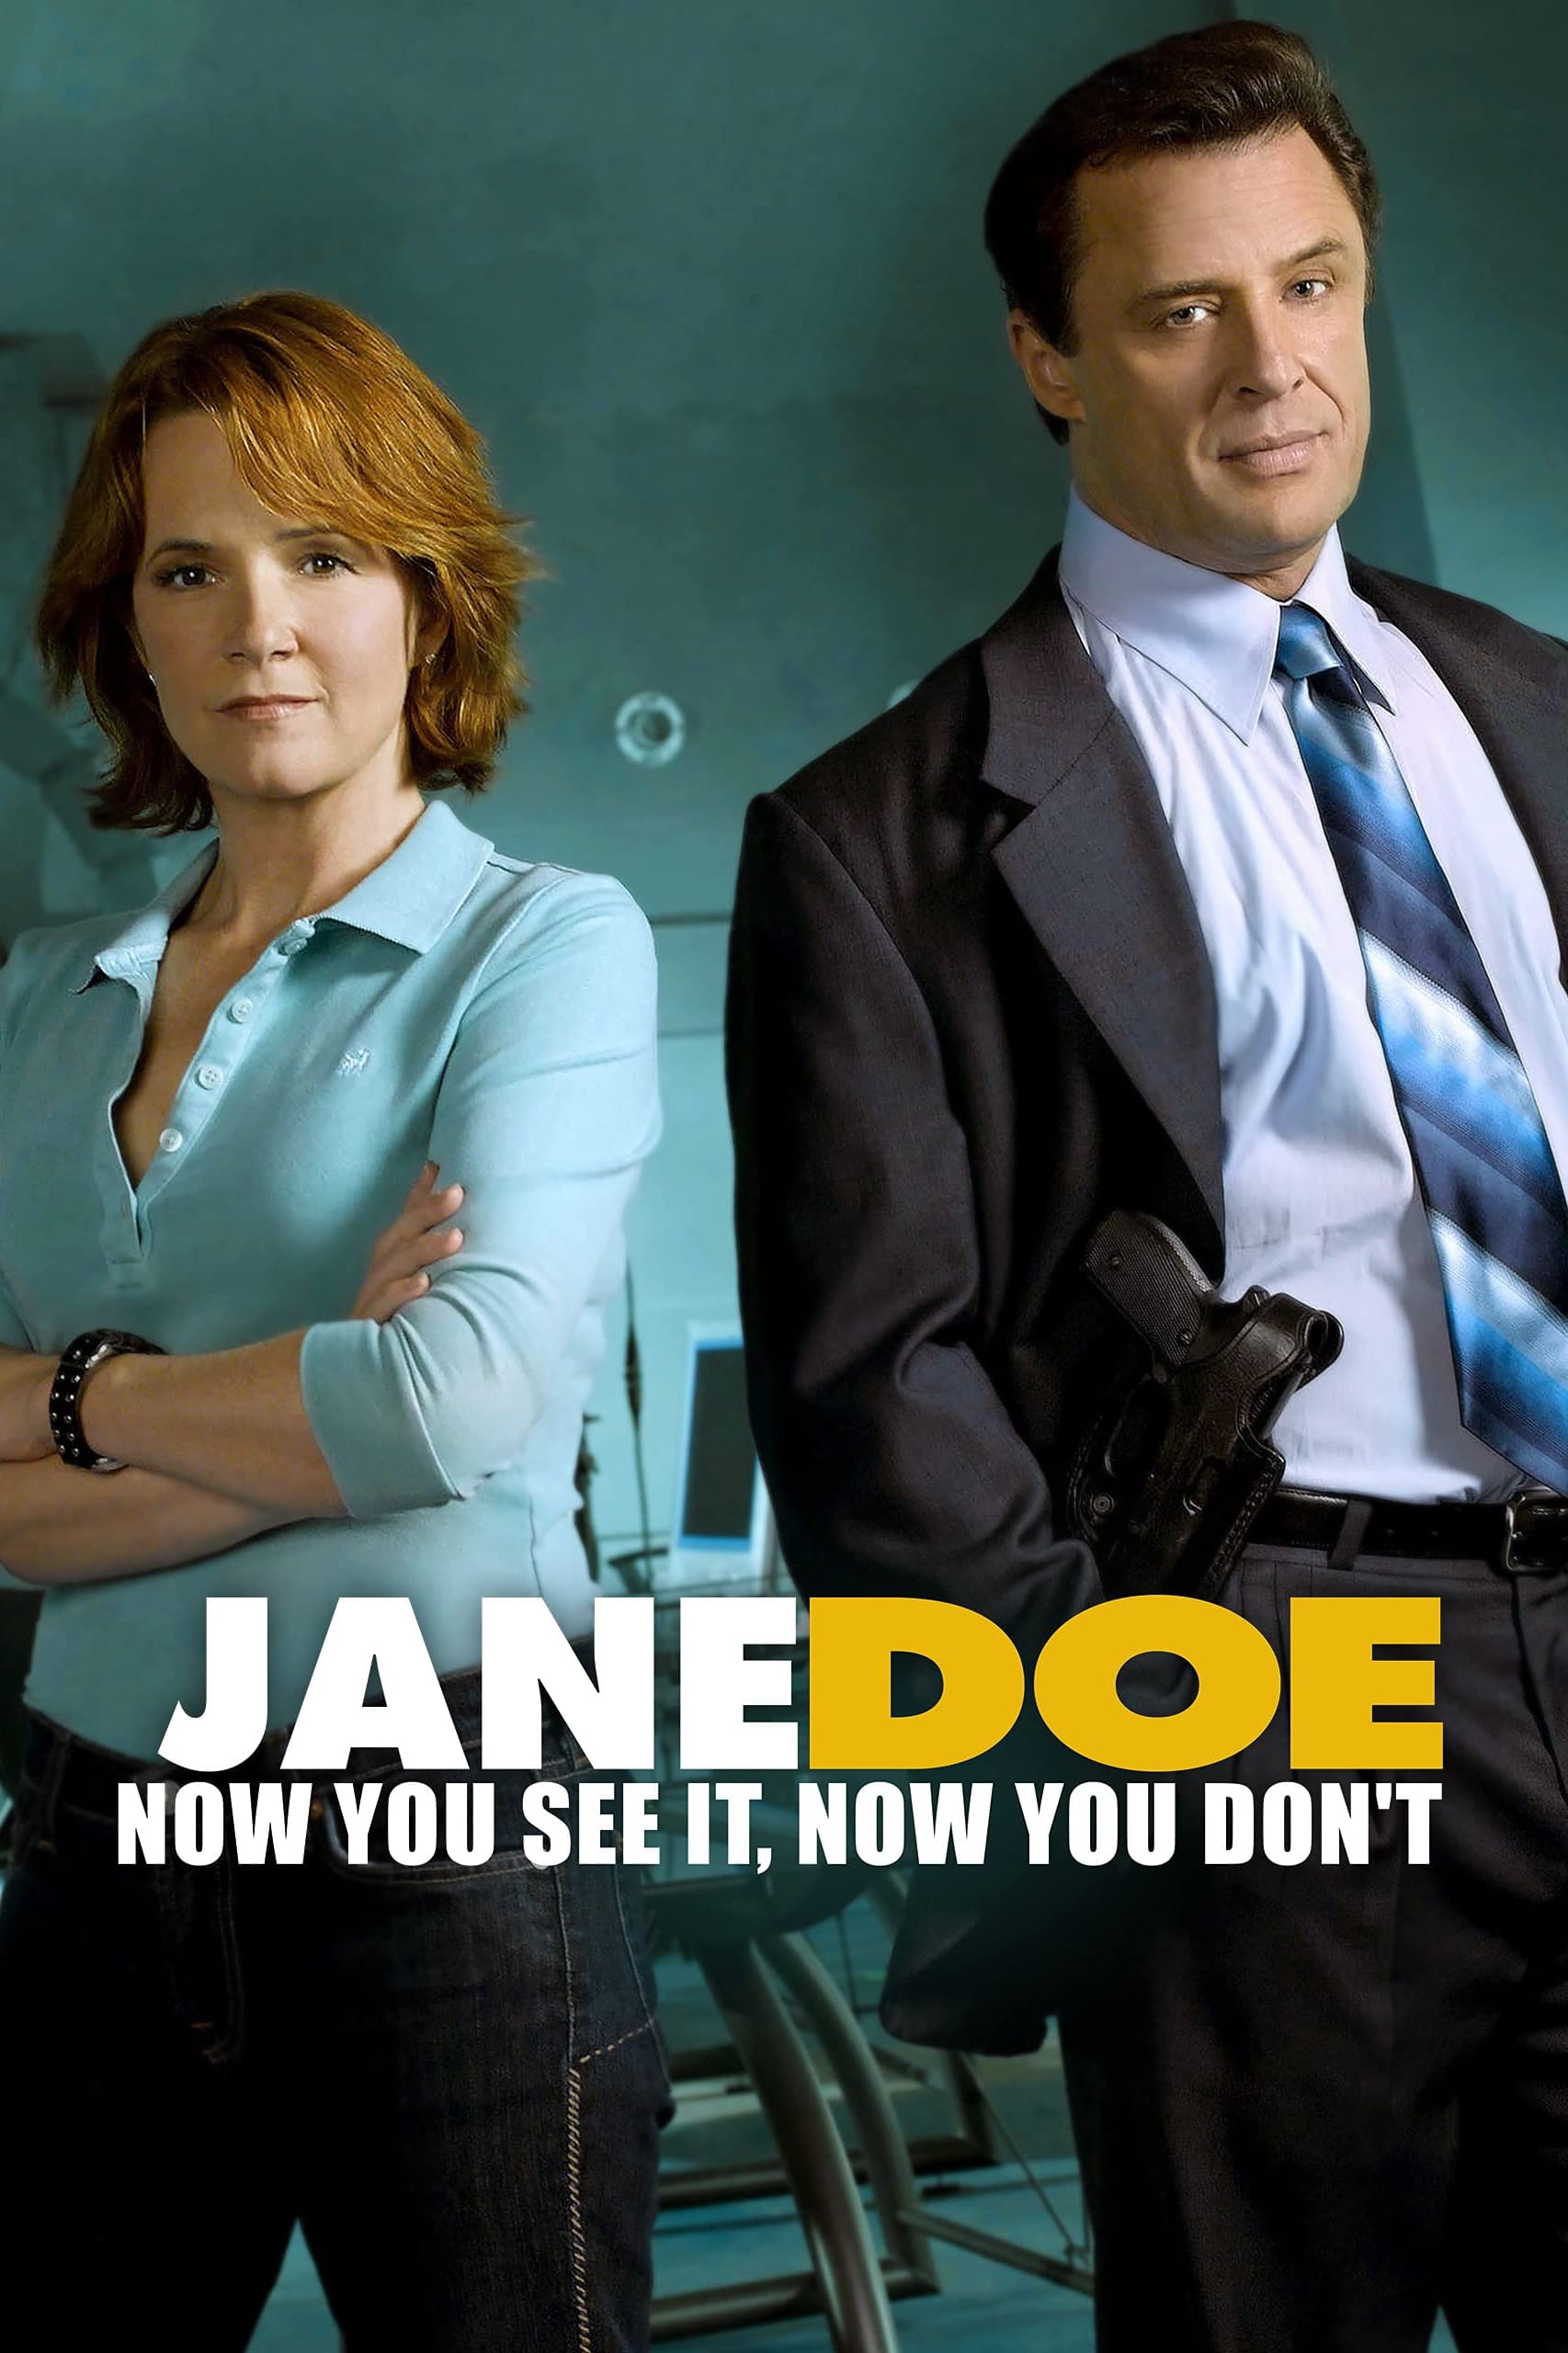 Jane Doe: Now You See It, Now You Don't (2005)